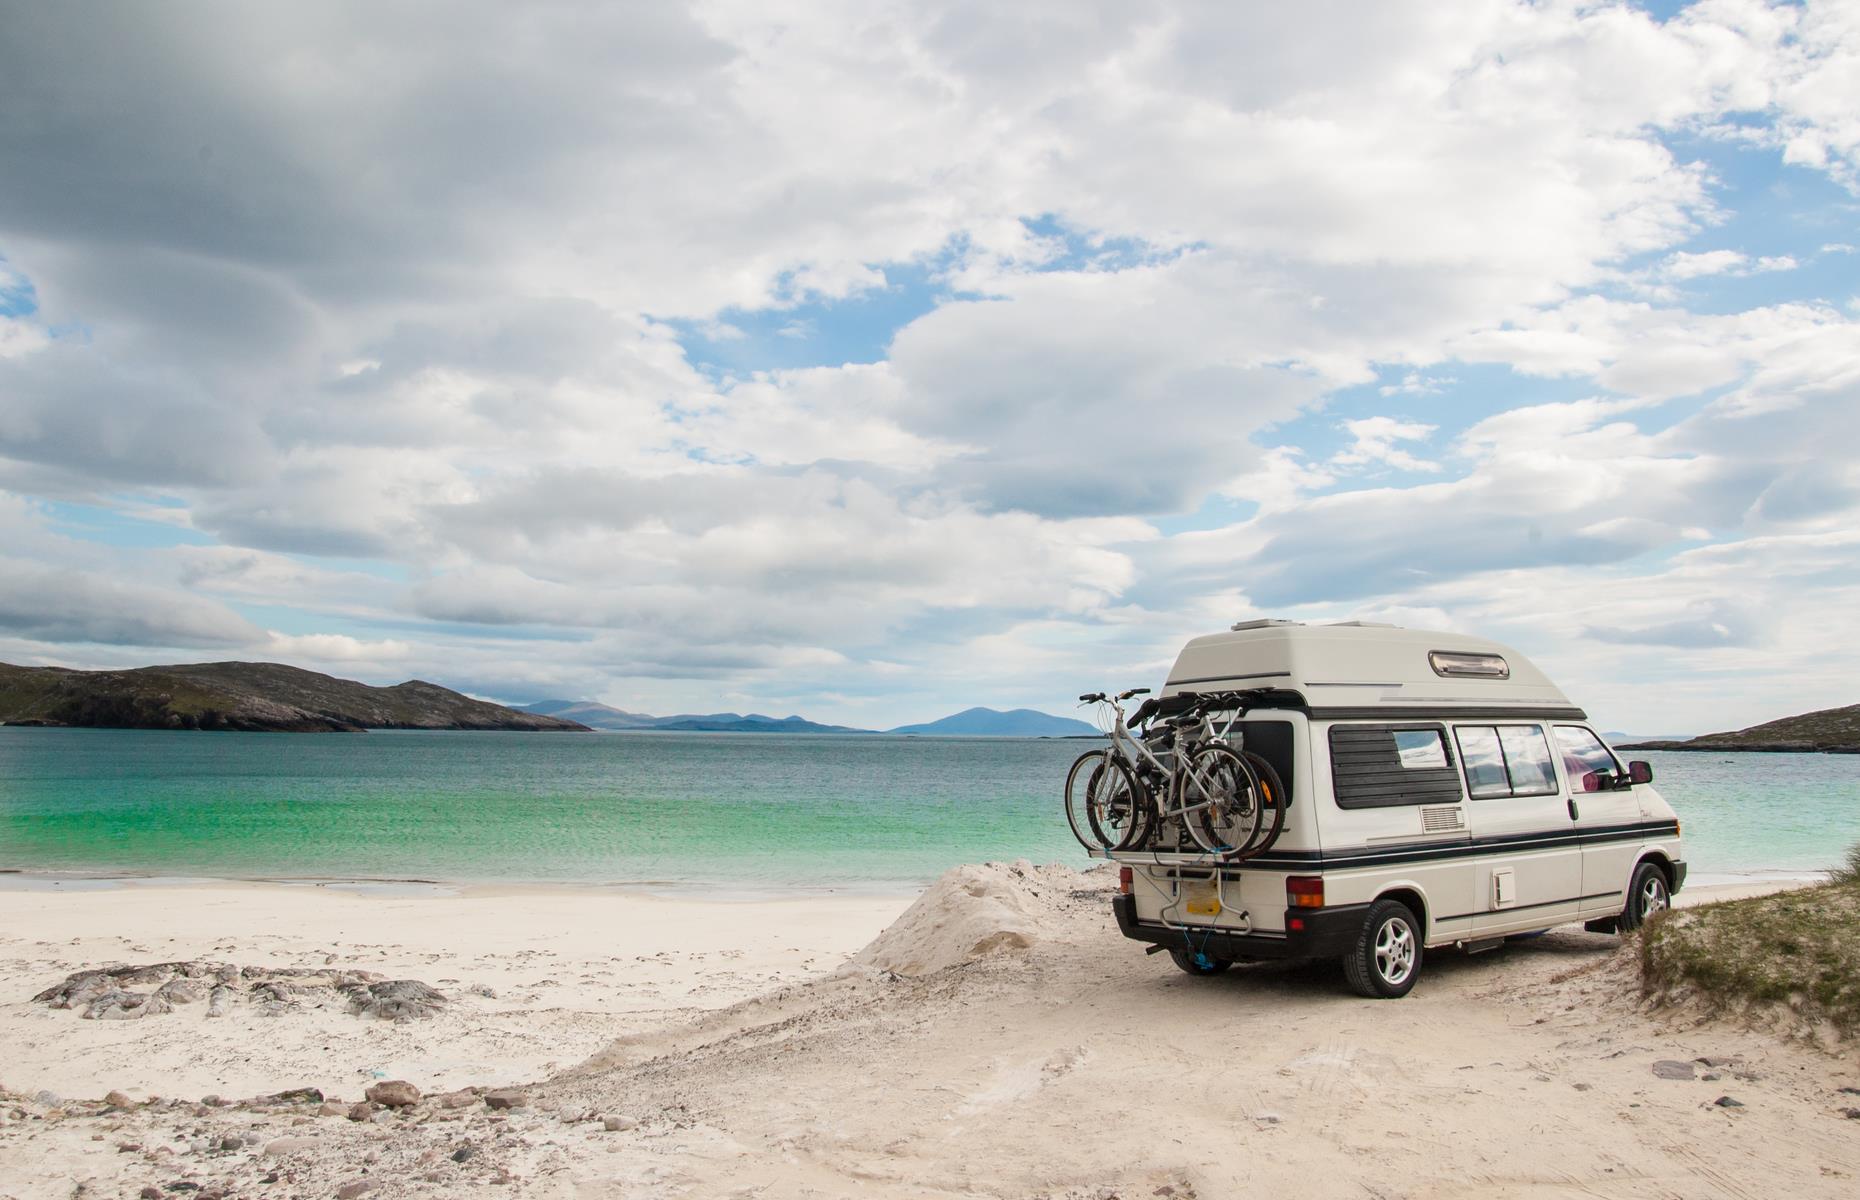 Planning on hitting the road in an RV or sleeping with only a layer of canvas between you and the stars? Read on for handy hints and tricks that will help your trip go more smoothly so you can make the most of your time in the great outdoors.